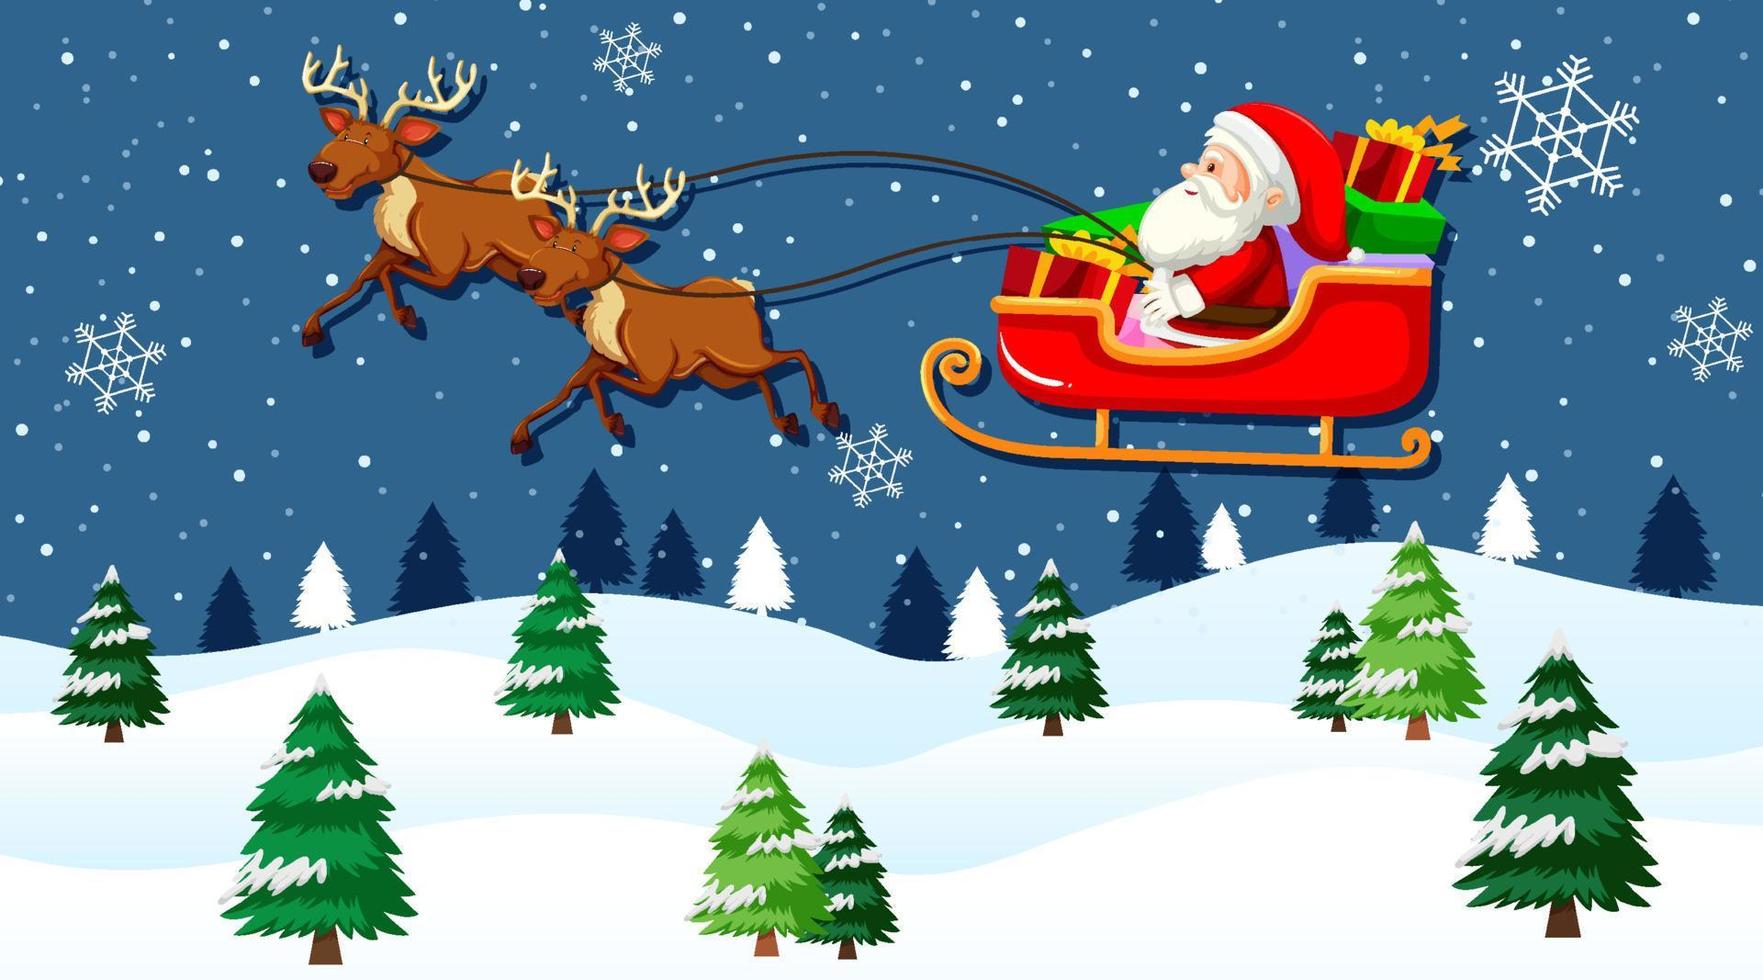 Santa Claus on sleigh with reindeer flying in the sky at night vector